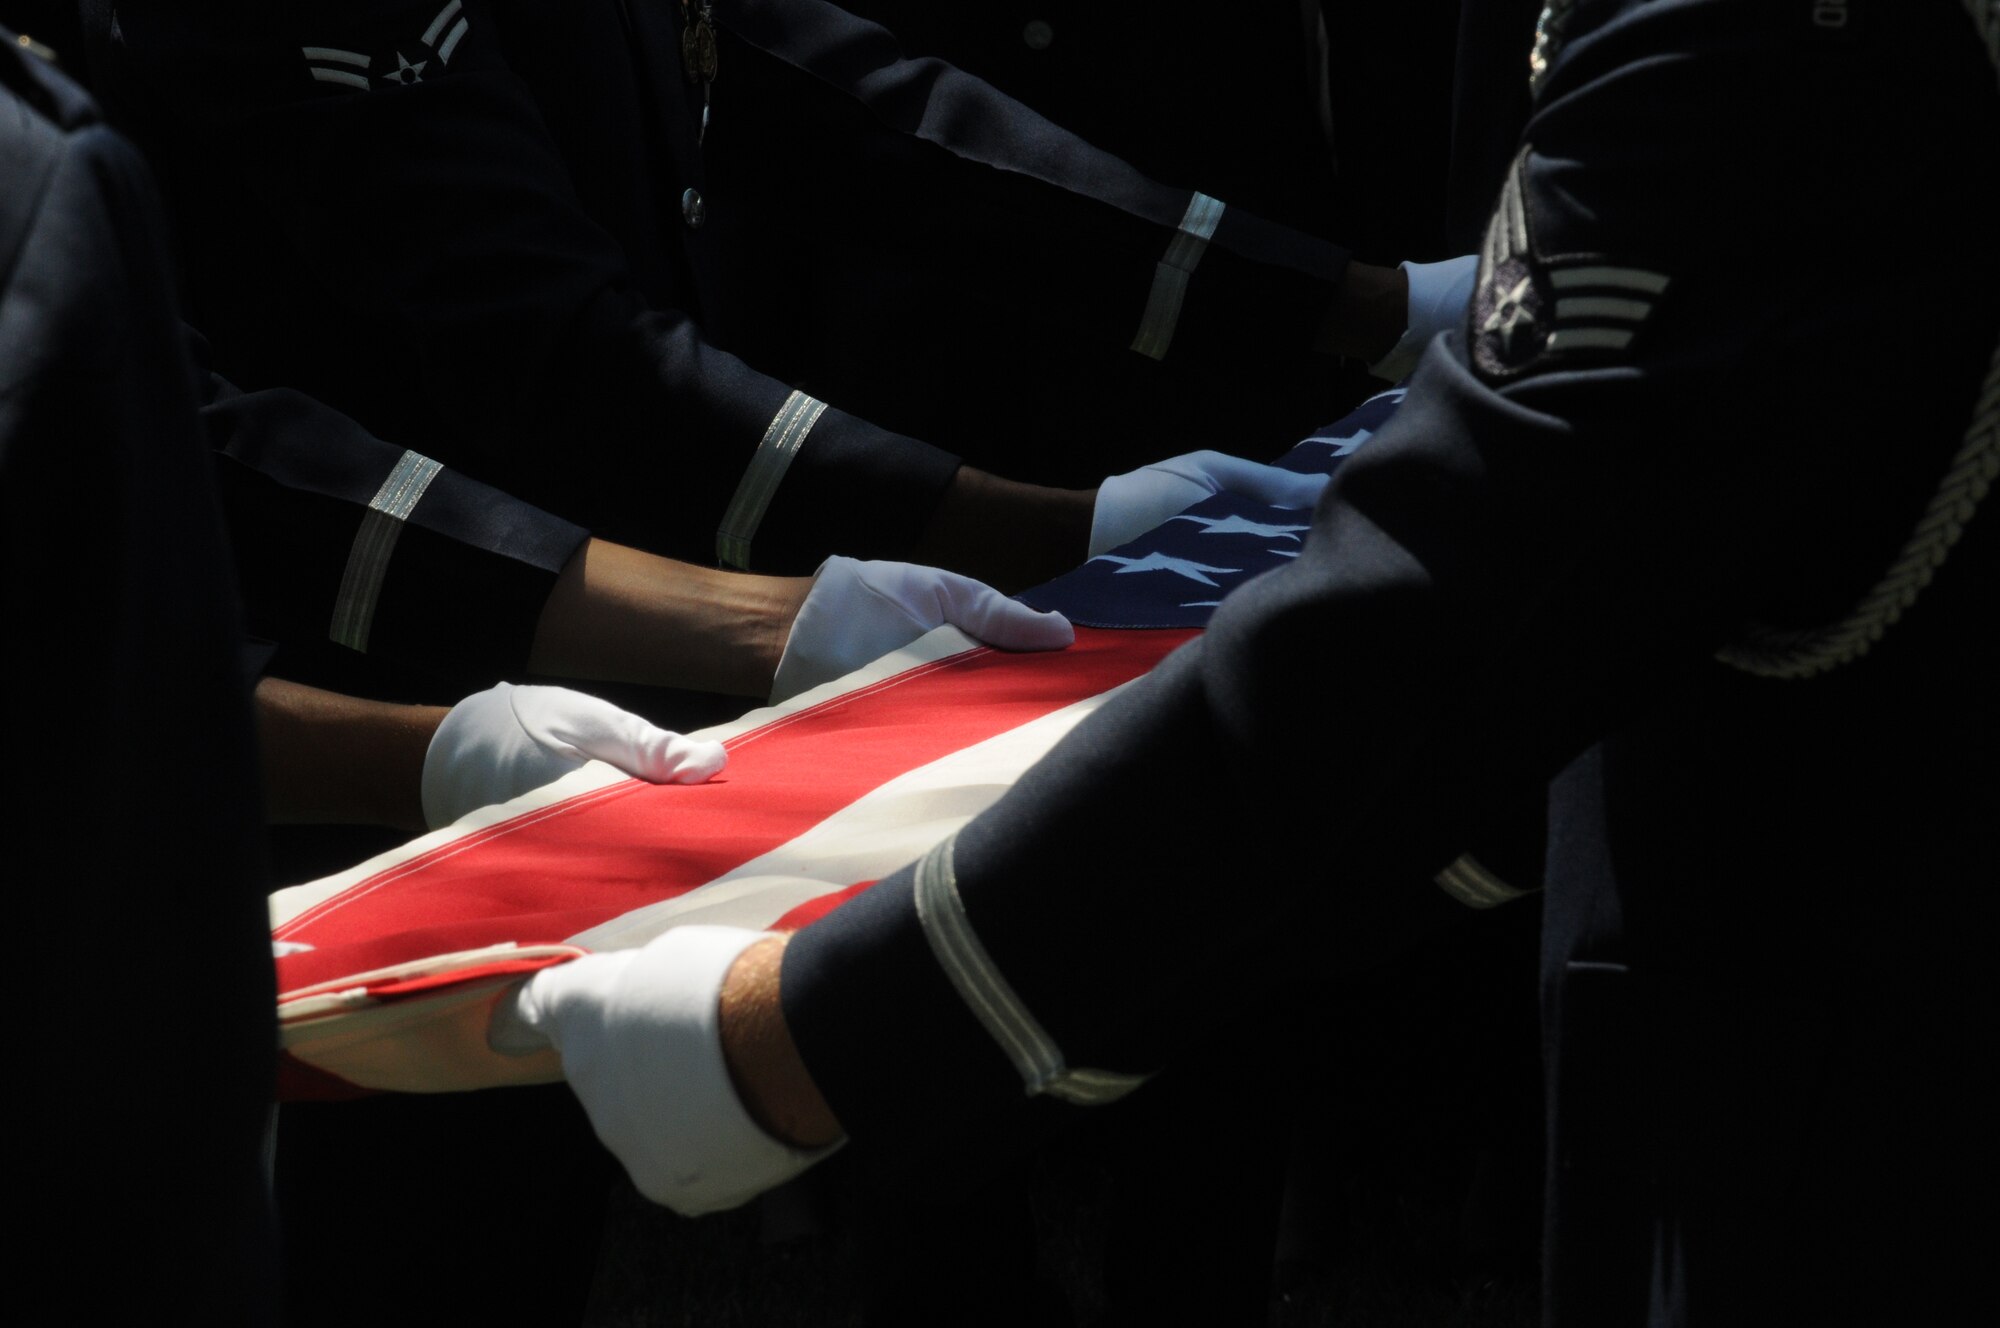 A United States Air Force Honor Guard body bearer team folds the U.S. flag during a full honors funeral ceremony at Arlington National Cemetery. Honor guard body bearers train constantly to maintain the precision they are known for. Their standards of flawlessness are set out of necessity to honor fallen Airmen. (U.S. Air Force photo by Senior Airman Sean Adams)